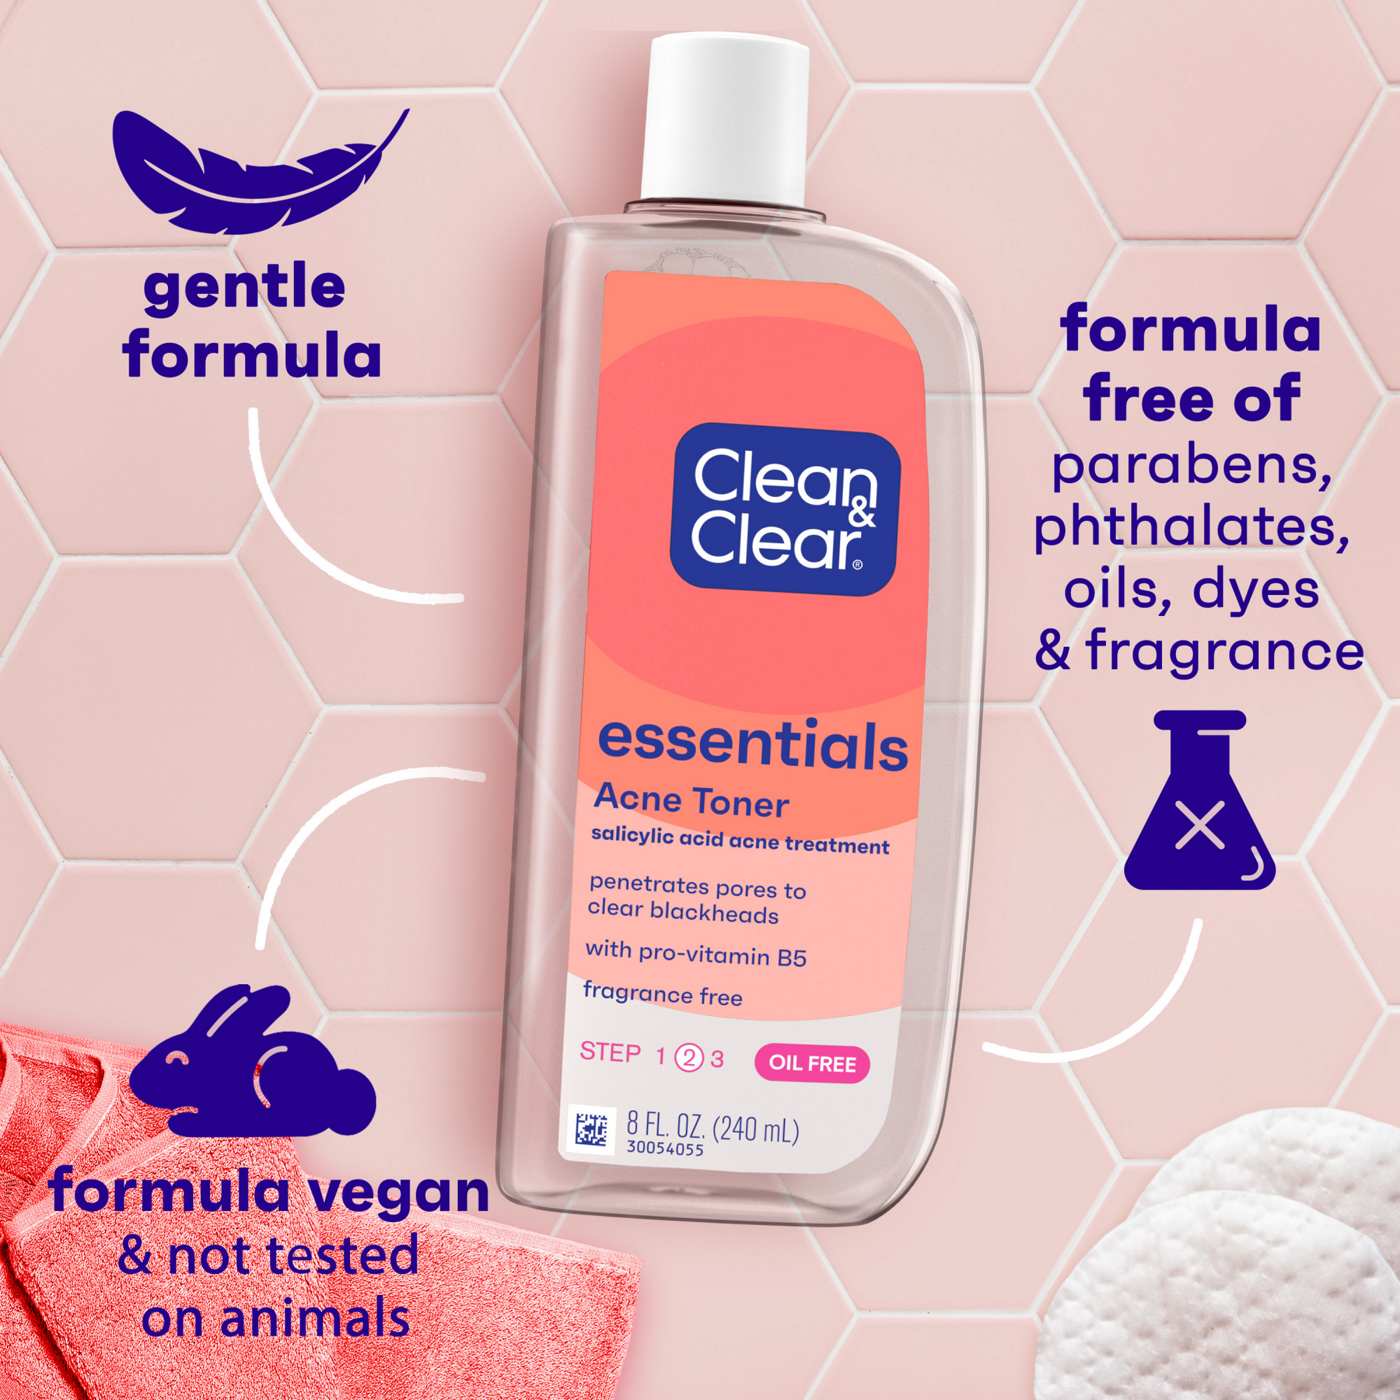 Clean & Clear Essentials Acne Toner; image 2 of 5